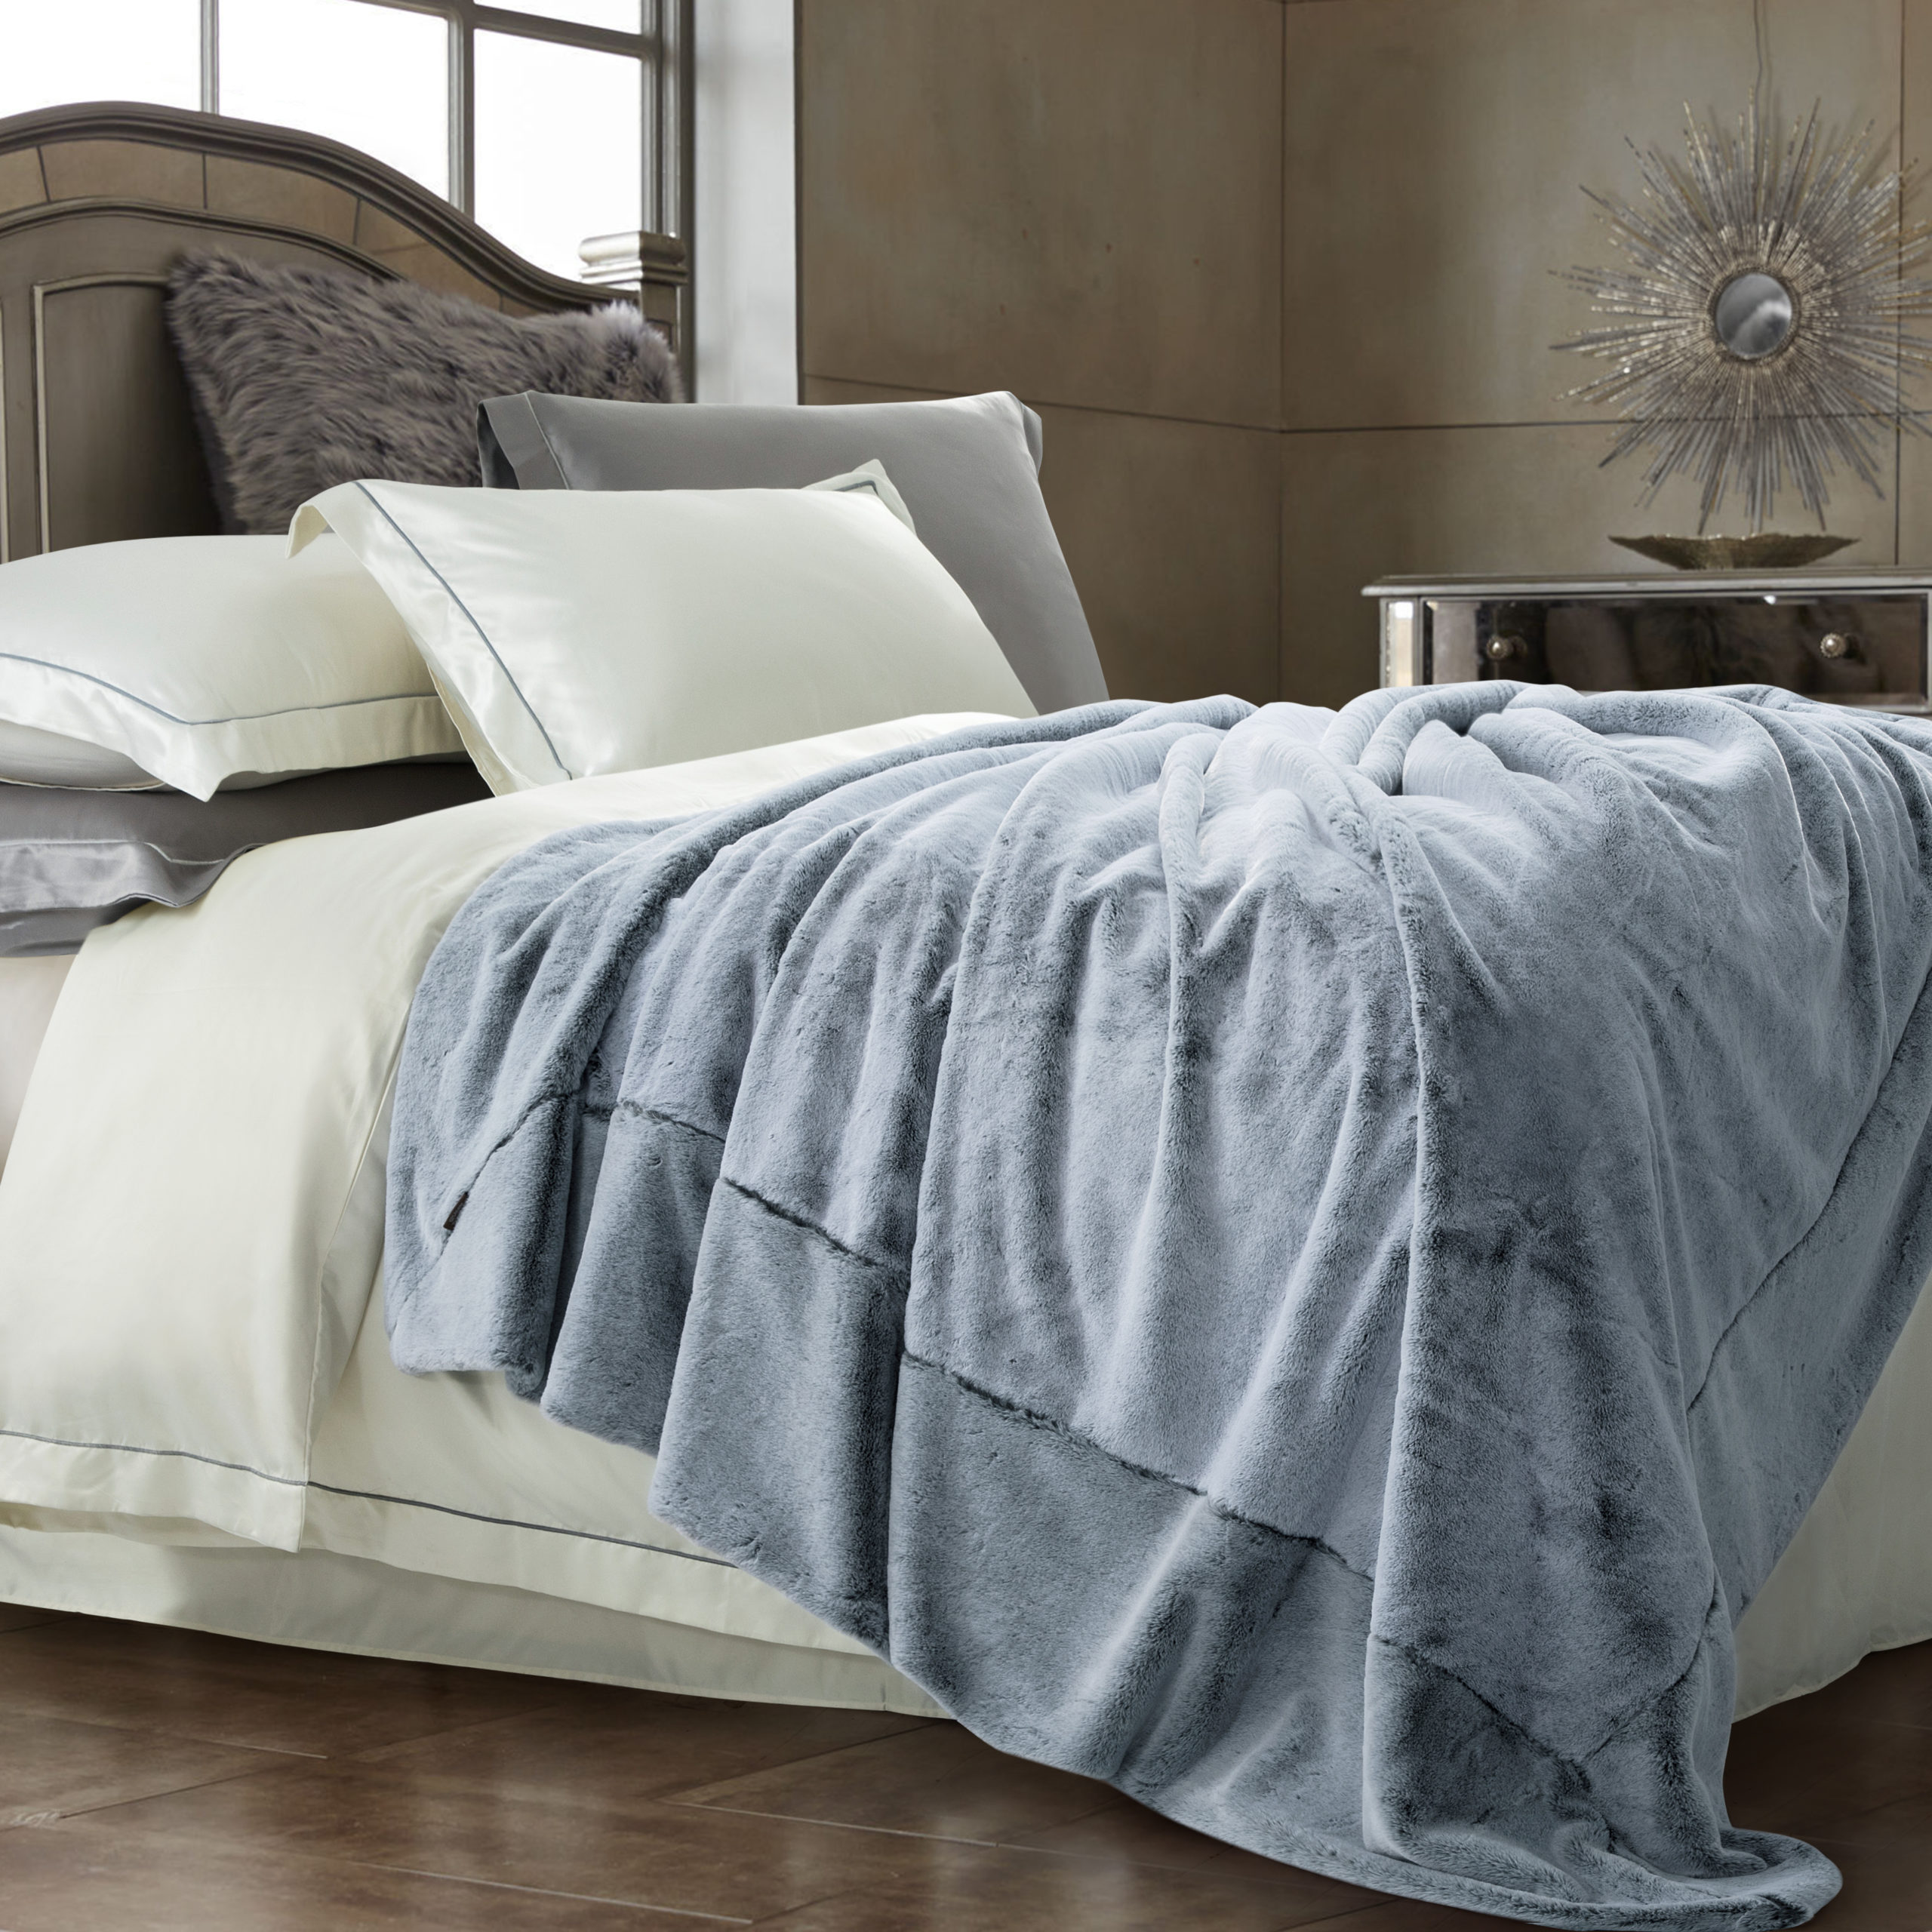 Luxurious Silky Soft 100% Faux Chinchilla Striped Fur King Queen Comforter Set 